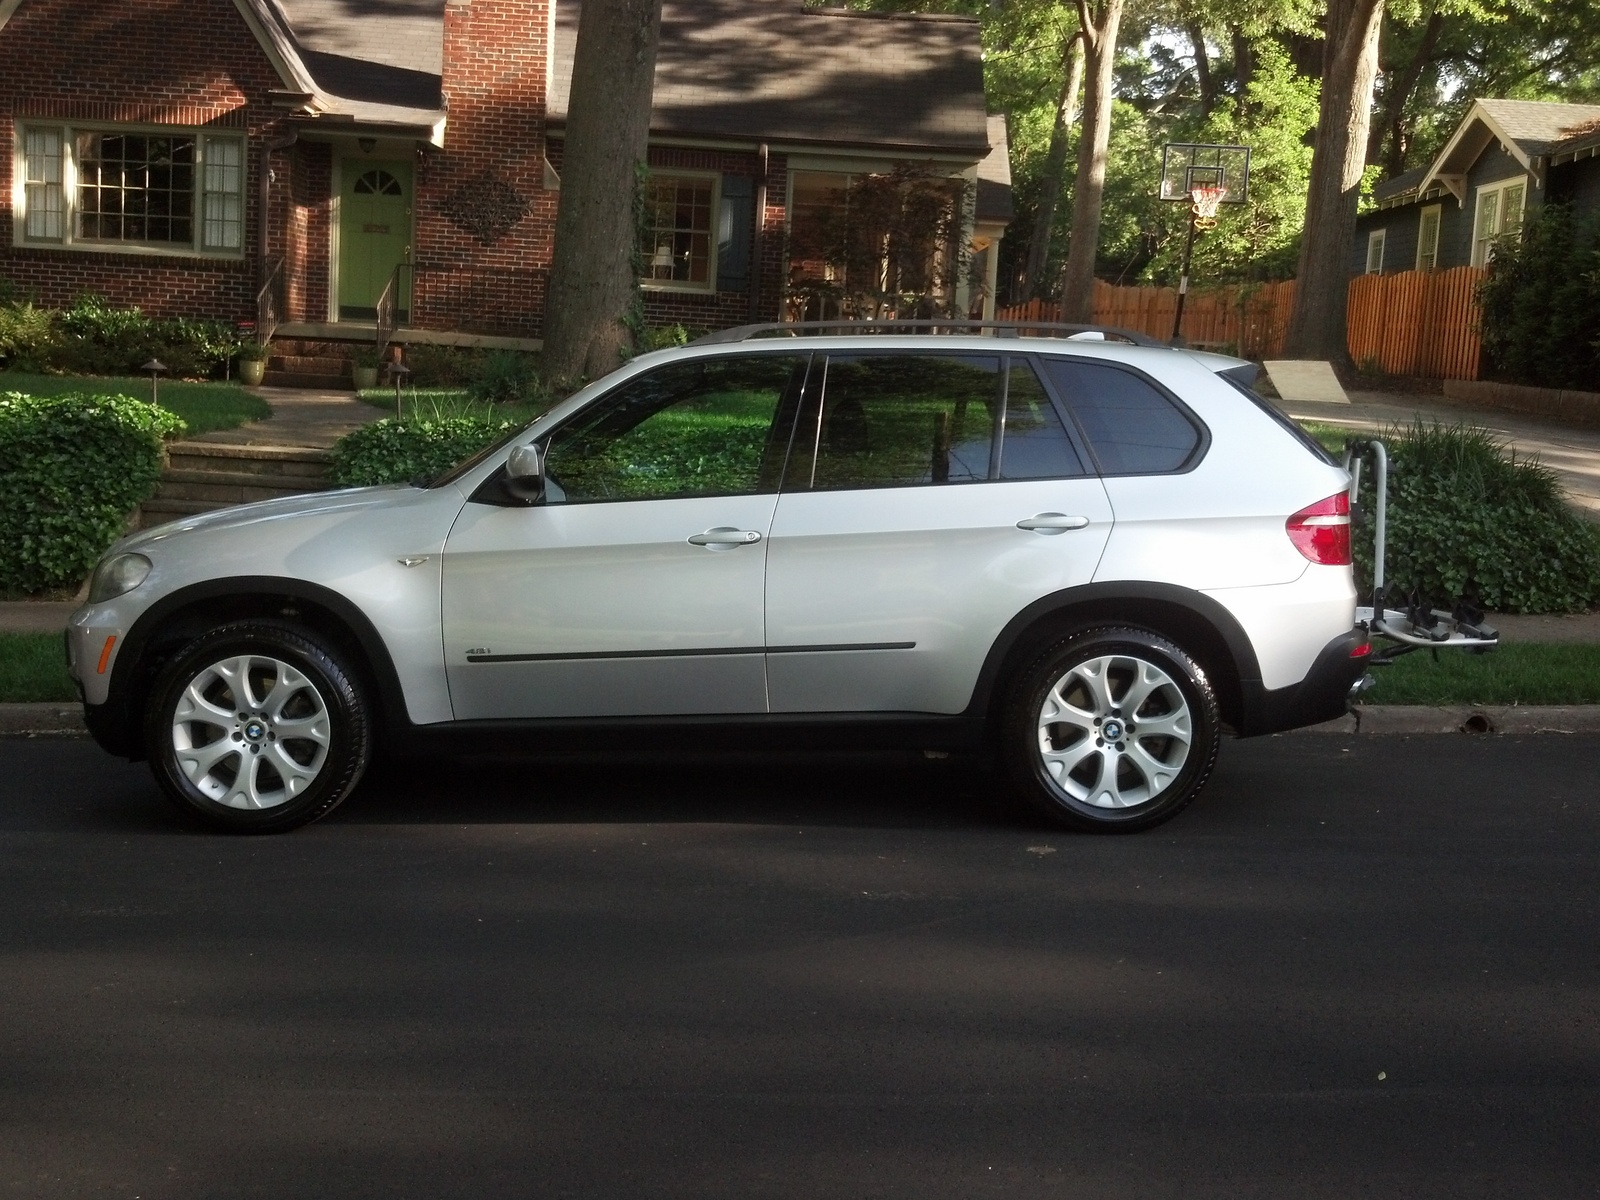 Bmw x5 for sale in greenville sc #7